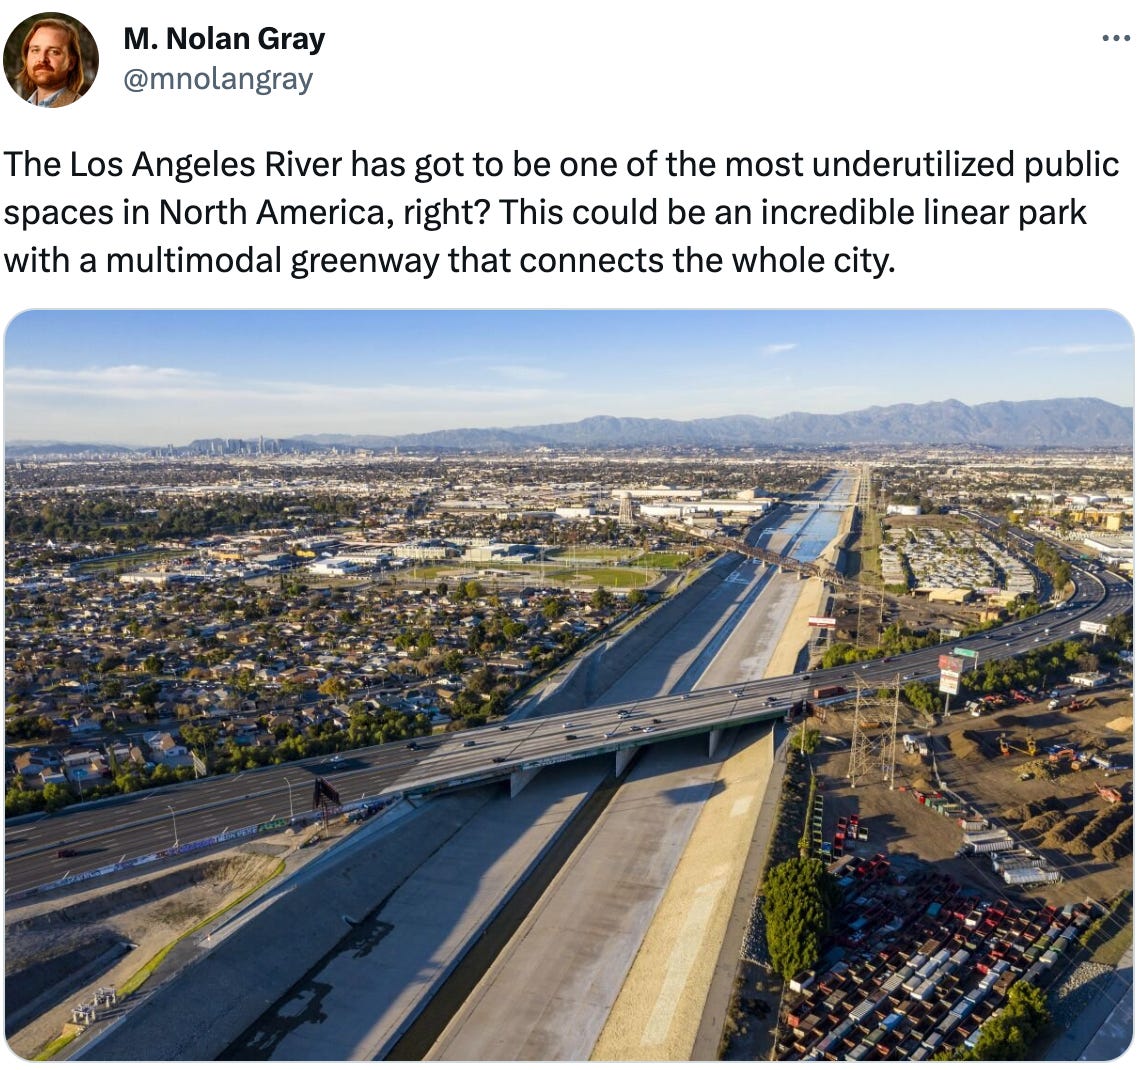  M. Nolan Gray @mnolangray The Los Angeles River has got to be one of the most underutilized public spaces in North America, right? This could be an incredible linear park with a multimodal greenway that connects the whole city.